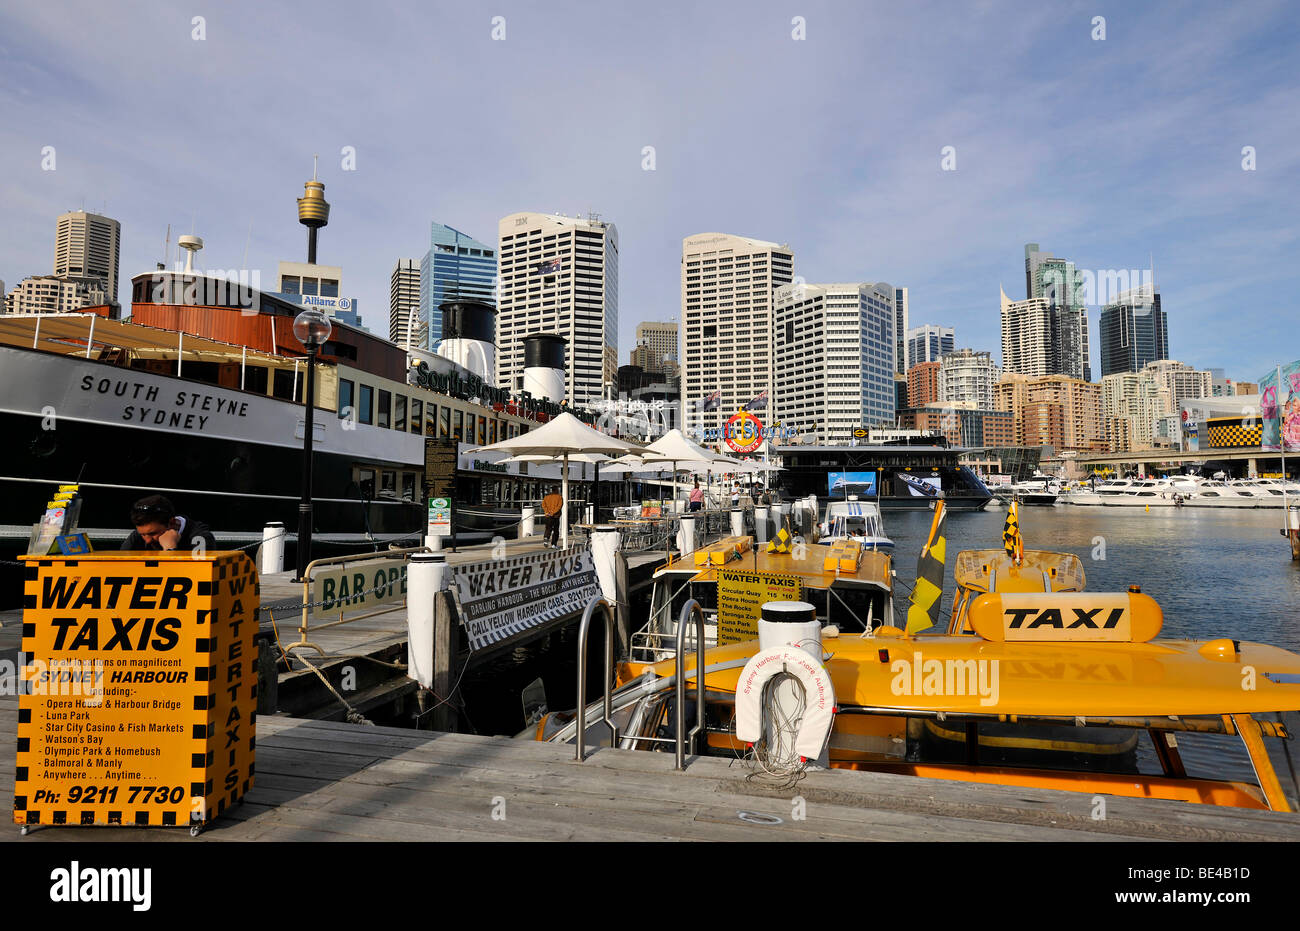 Water taxis in Darling Harbour in front of Sydney Tower or Centrepoint Tower and the skyline of the Central Business District,  Stock Photo